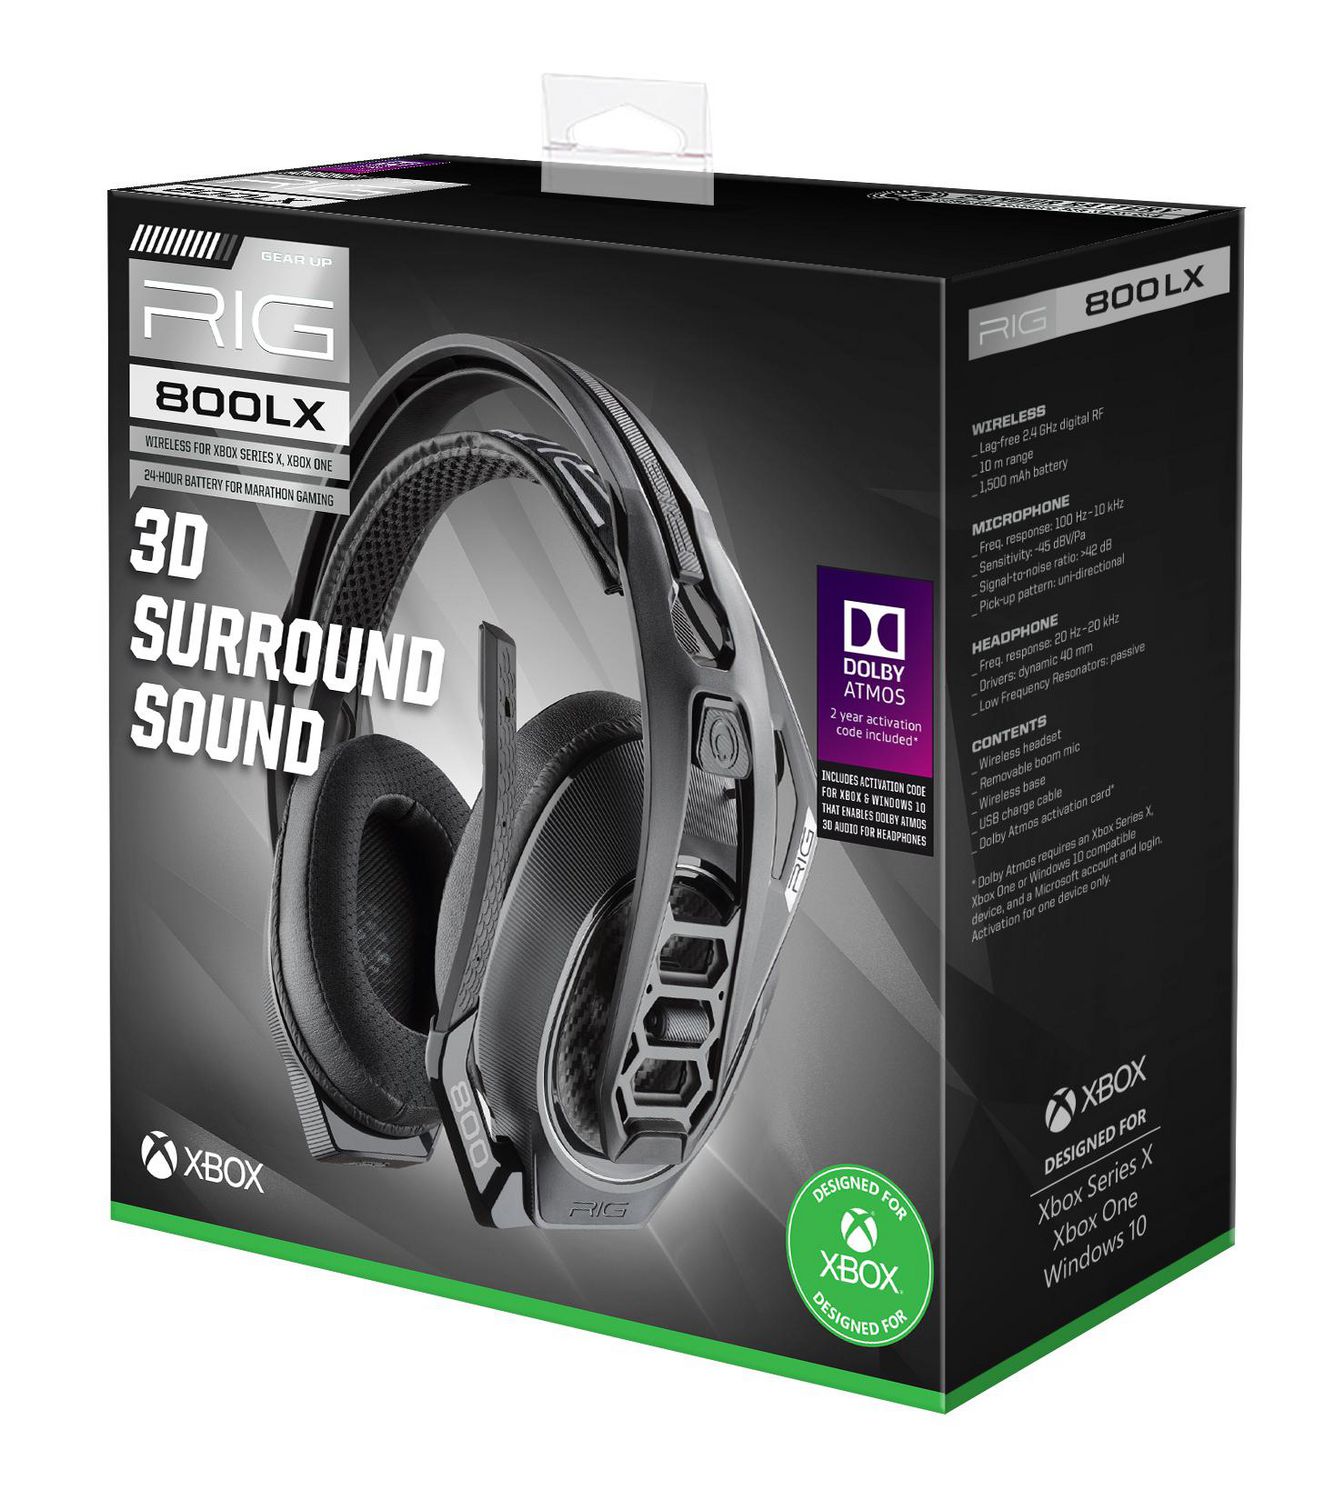  RIG 800LX Dolby Atmos Wireless Gaming Headset for PC